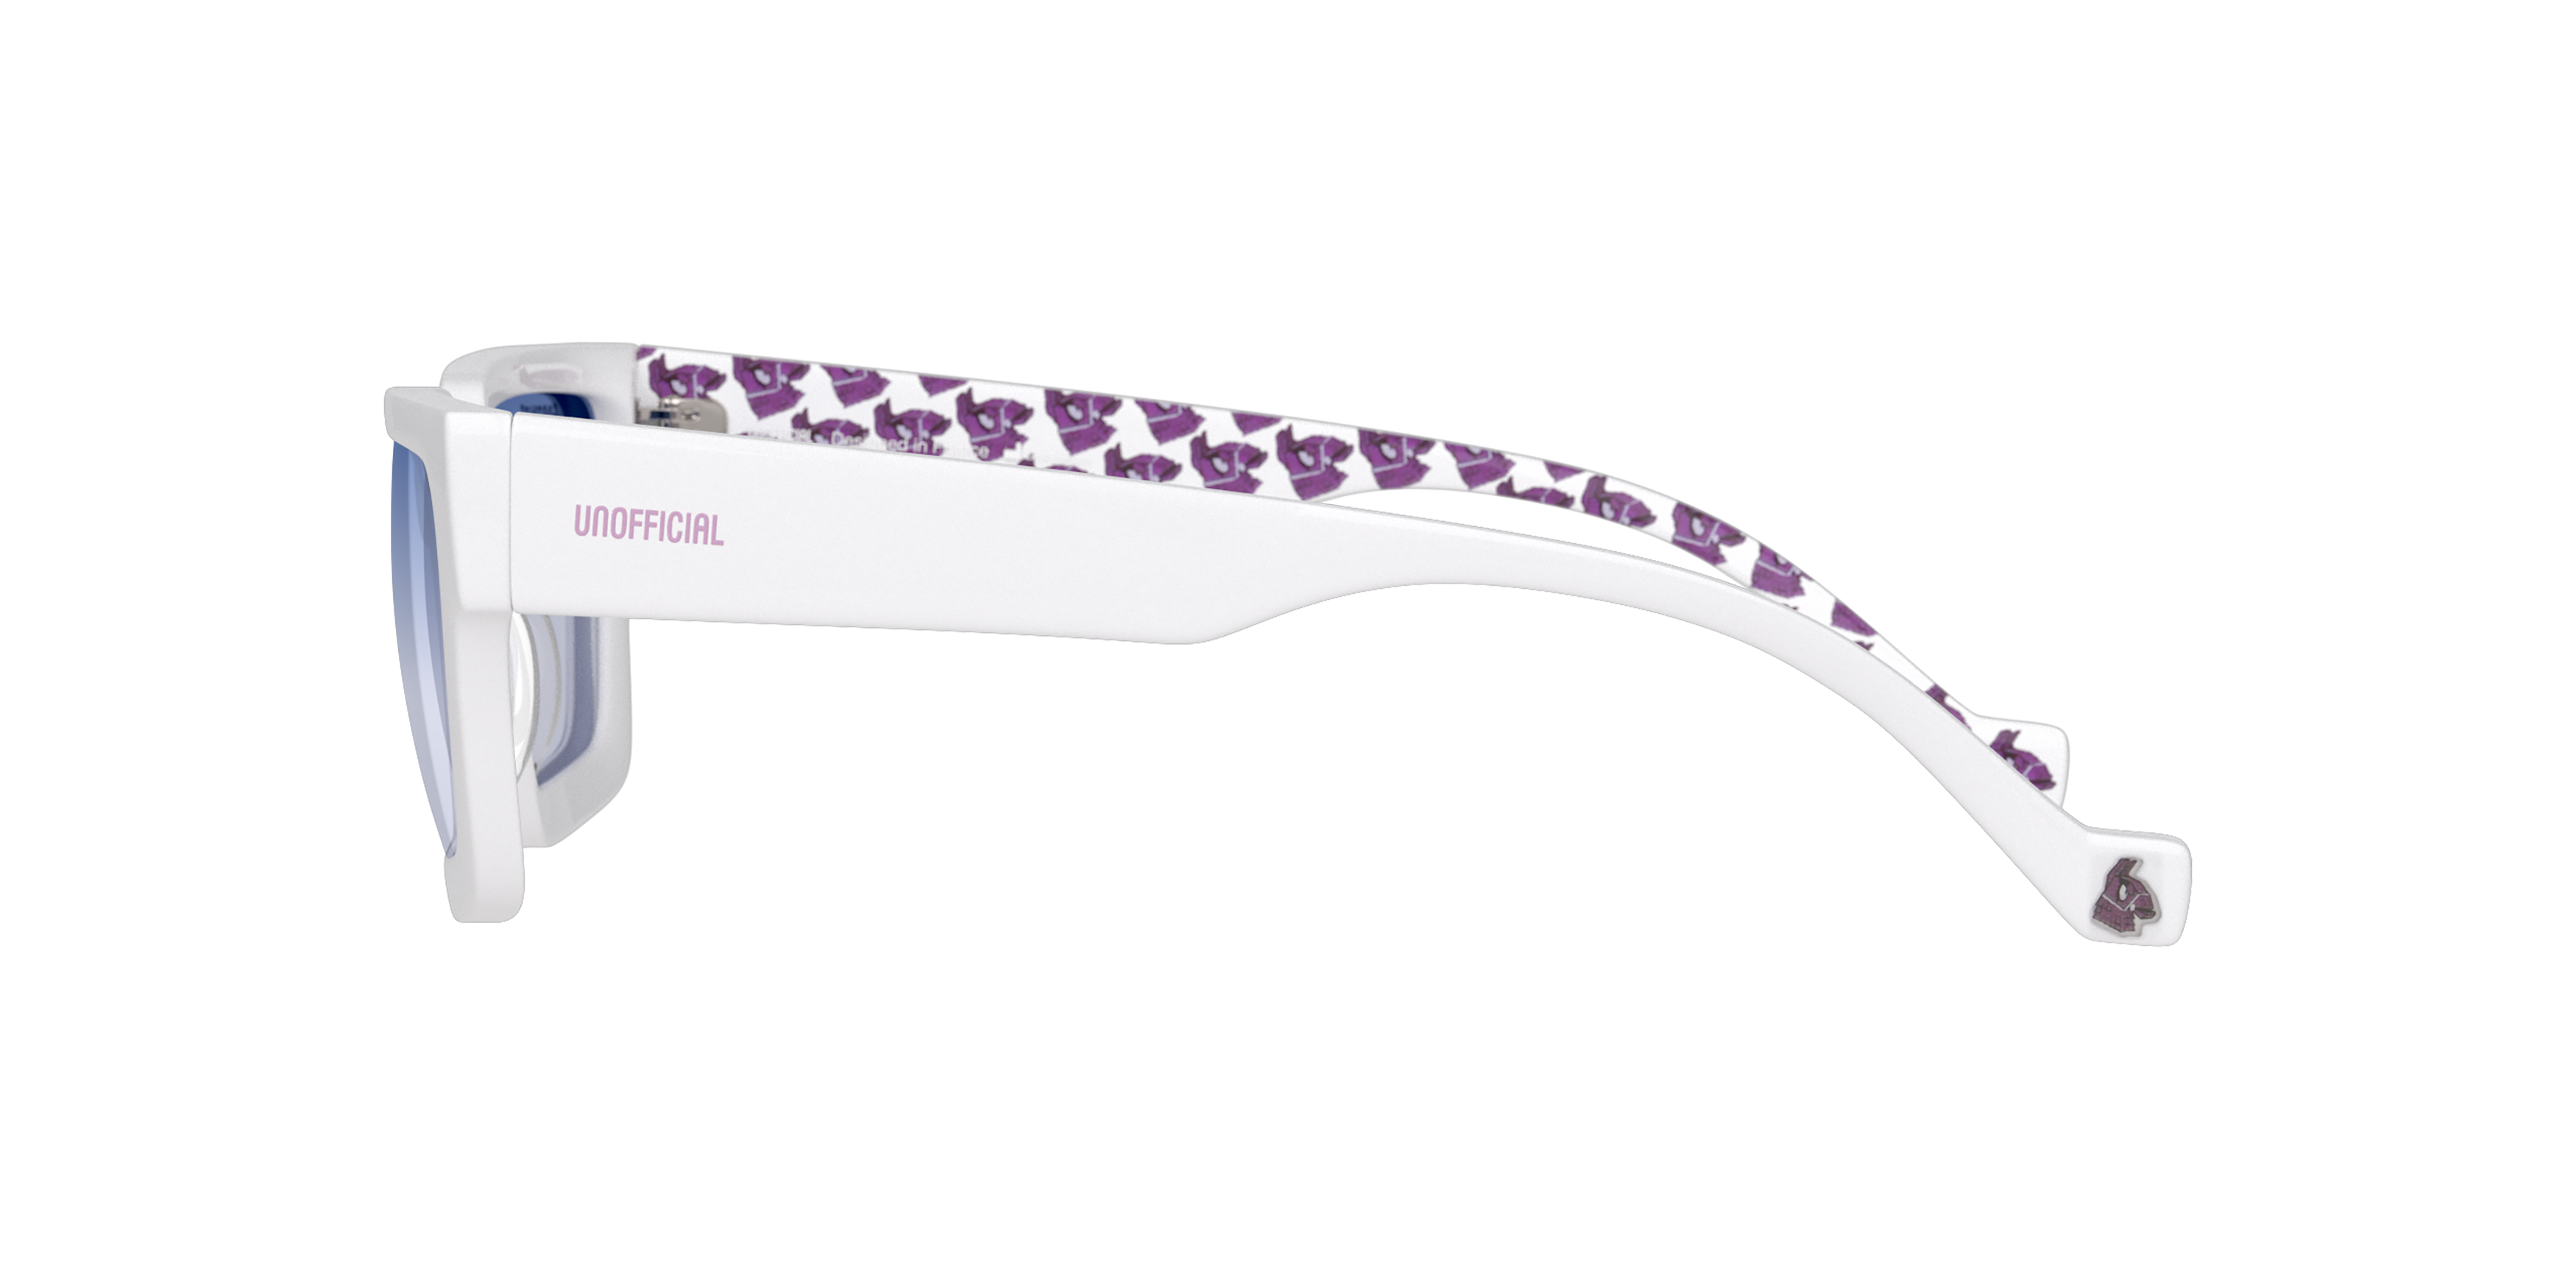 Angle_Left02 Fortnite with Unofficial UNSU0150 Sunglasses Violet / White